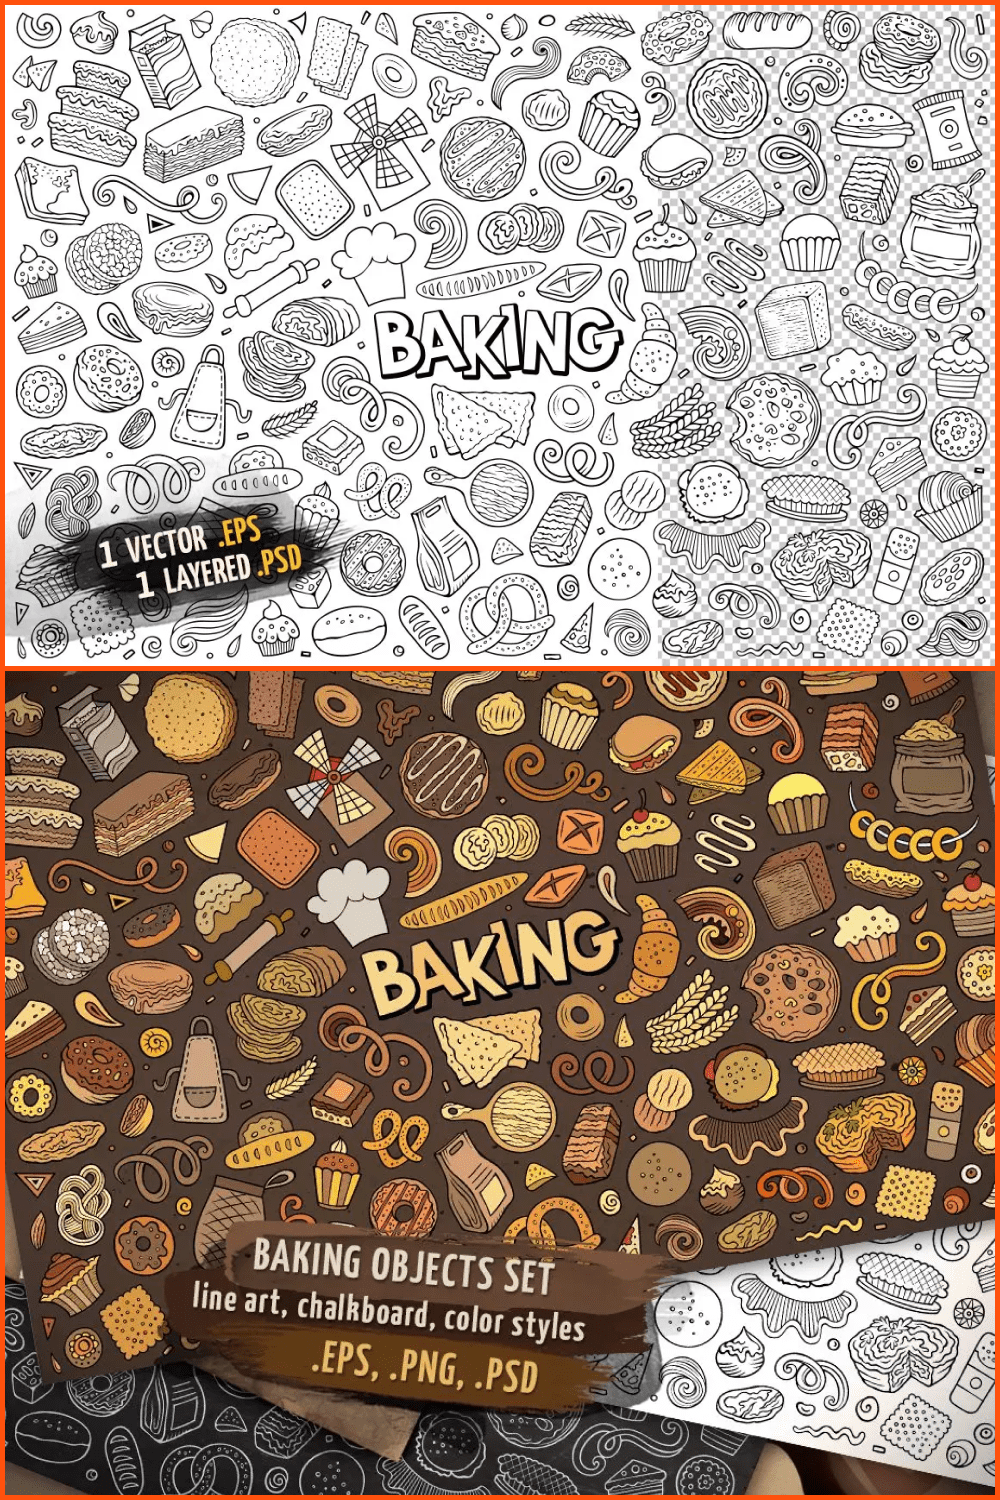 Doodles on the theme of baking in color and black and white.